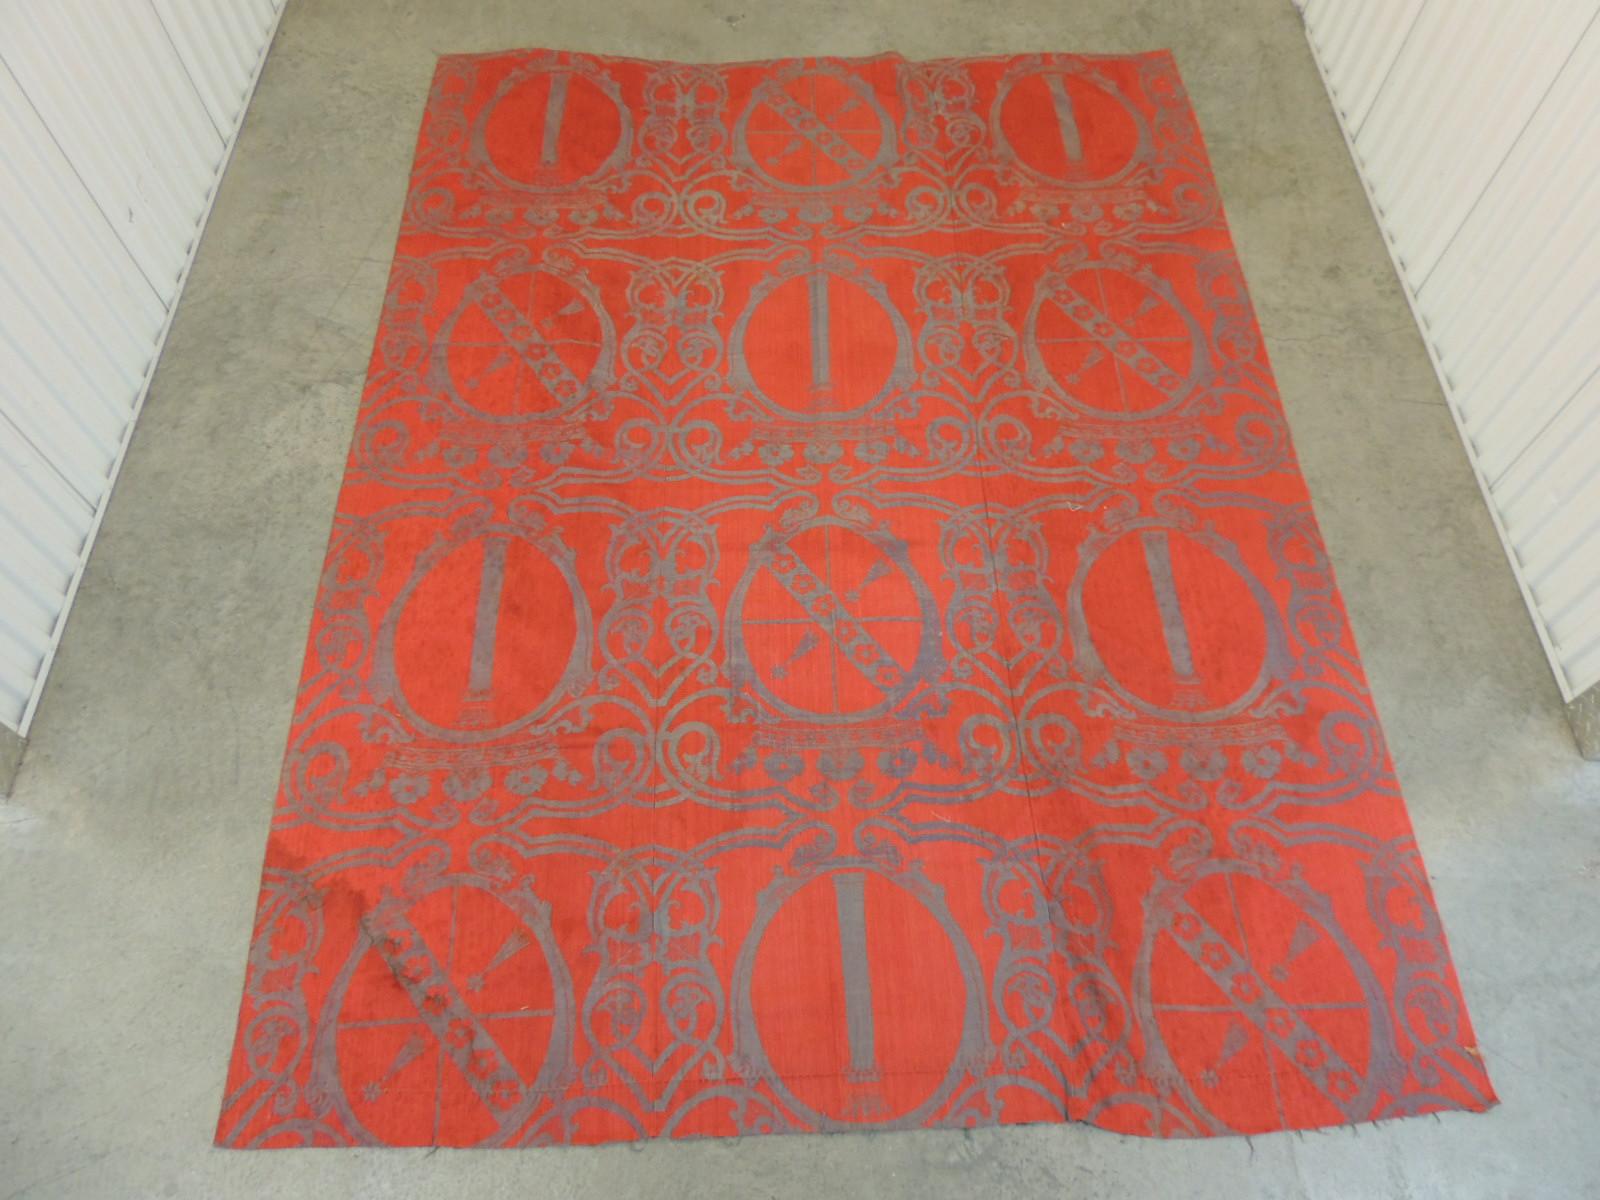 Large scale grey and red woven textile panel.
Ideal as a wall hanging, portiere, tapestry, bed cover or upholstery.
Size: 73